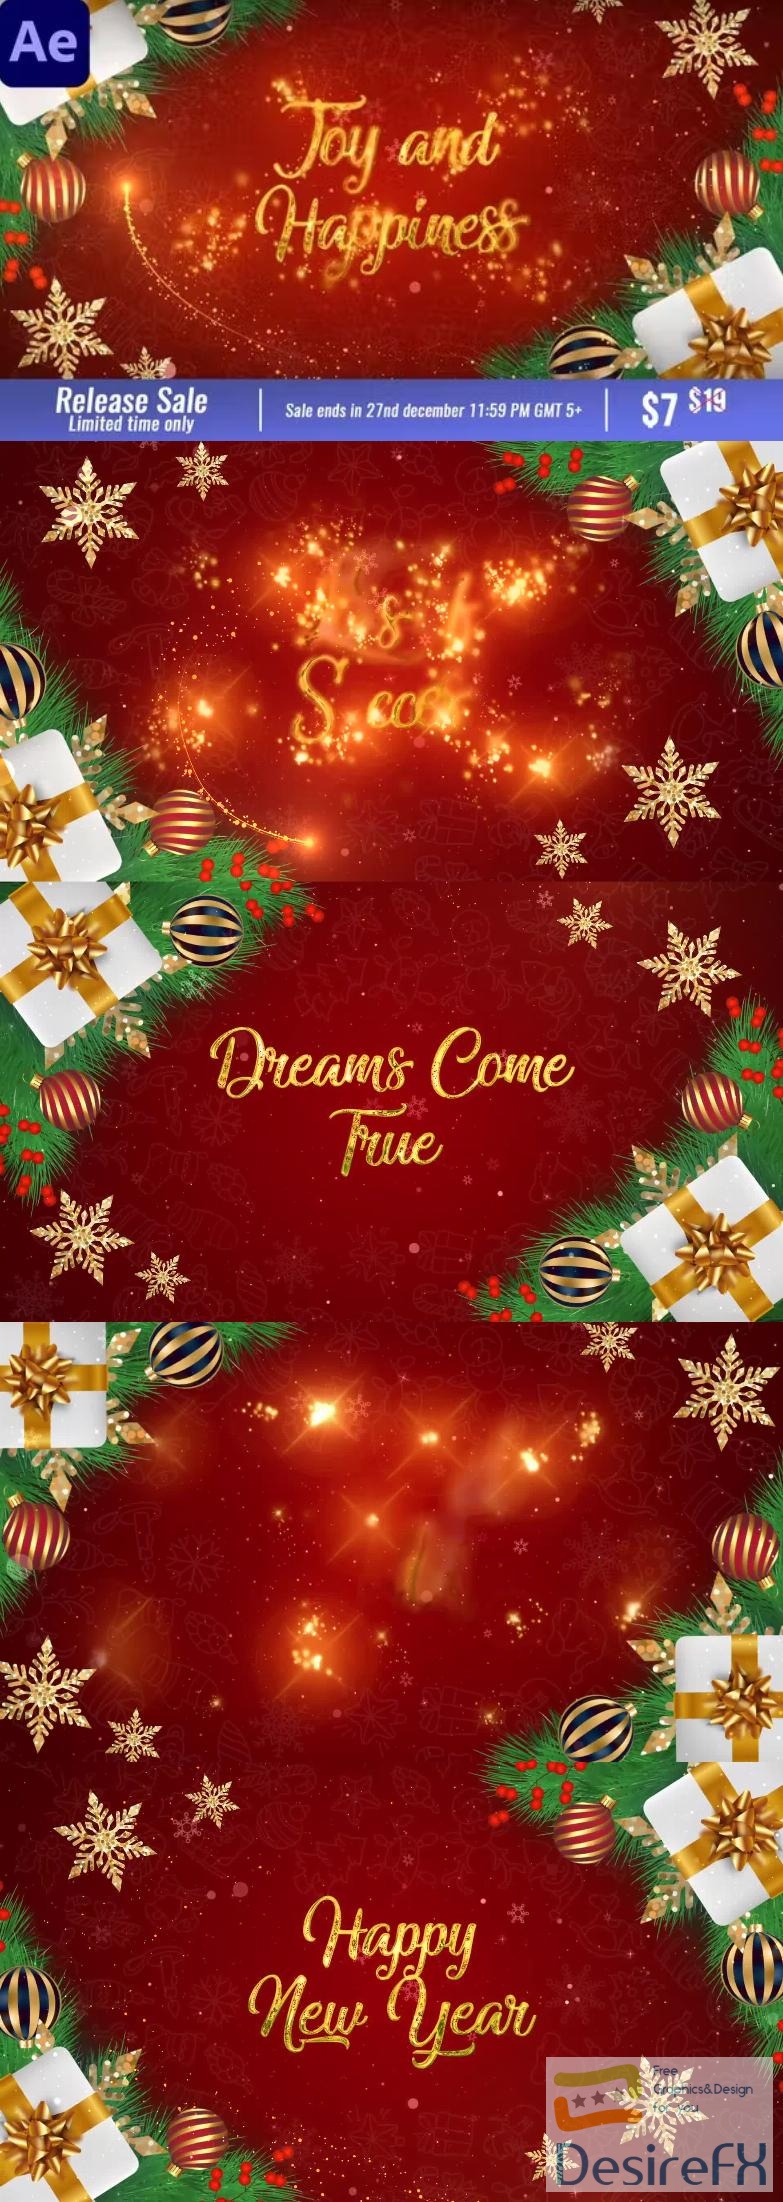 Videohive Christmas Wish Christmas Titles New Year Greetings Happy New Year 42464993